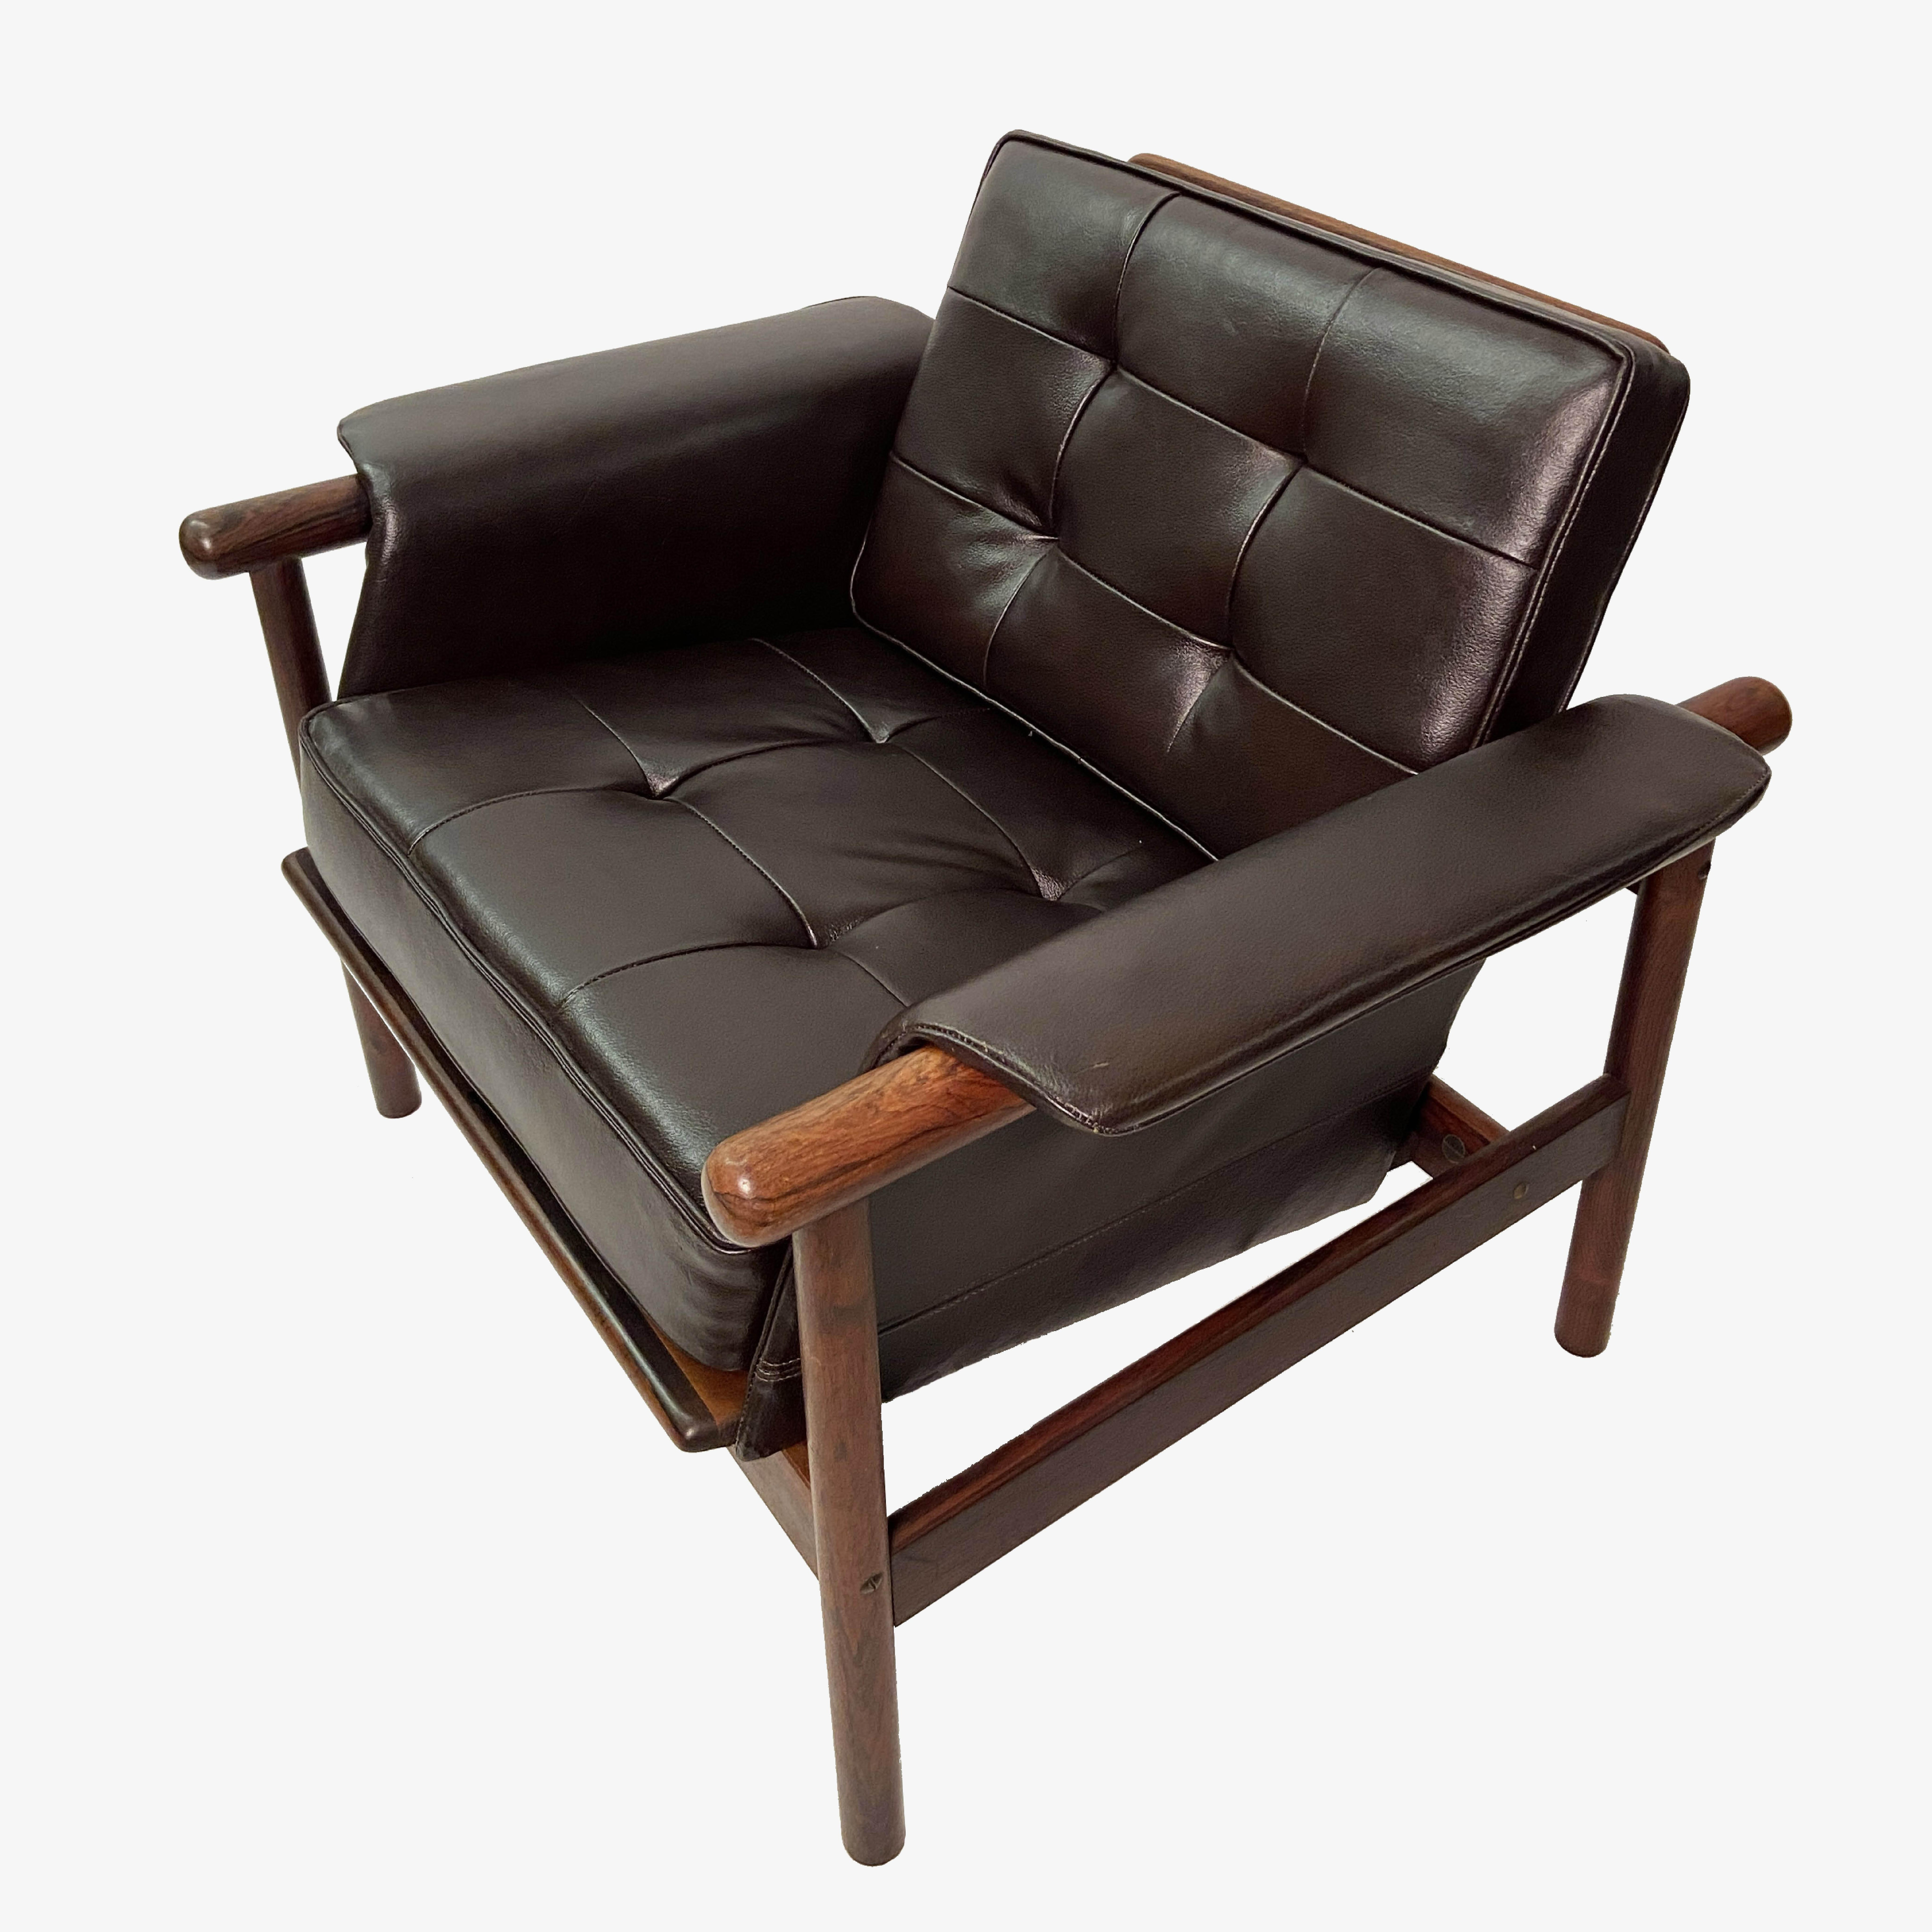 Danish Illum Wikkelsø 'Wiki' Lounge Chairs in Rosewood and Espresso Leather, Pair For Sale